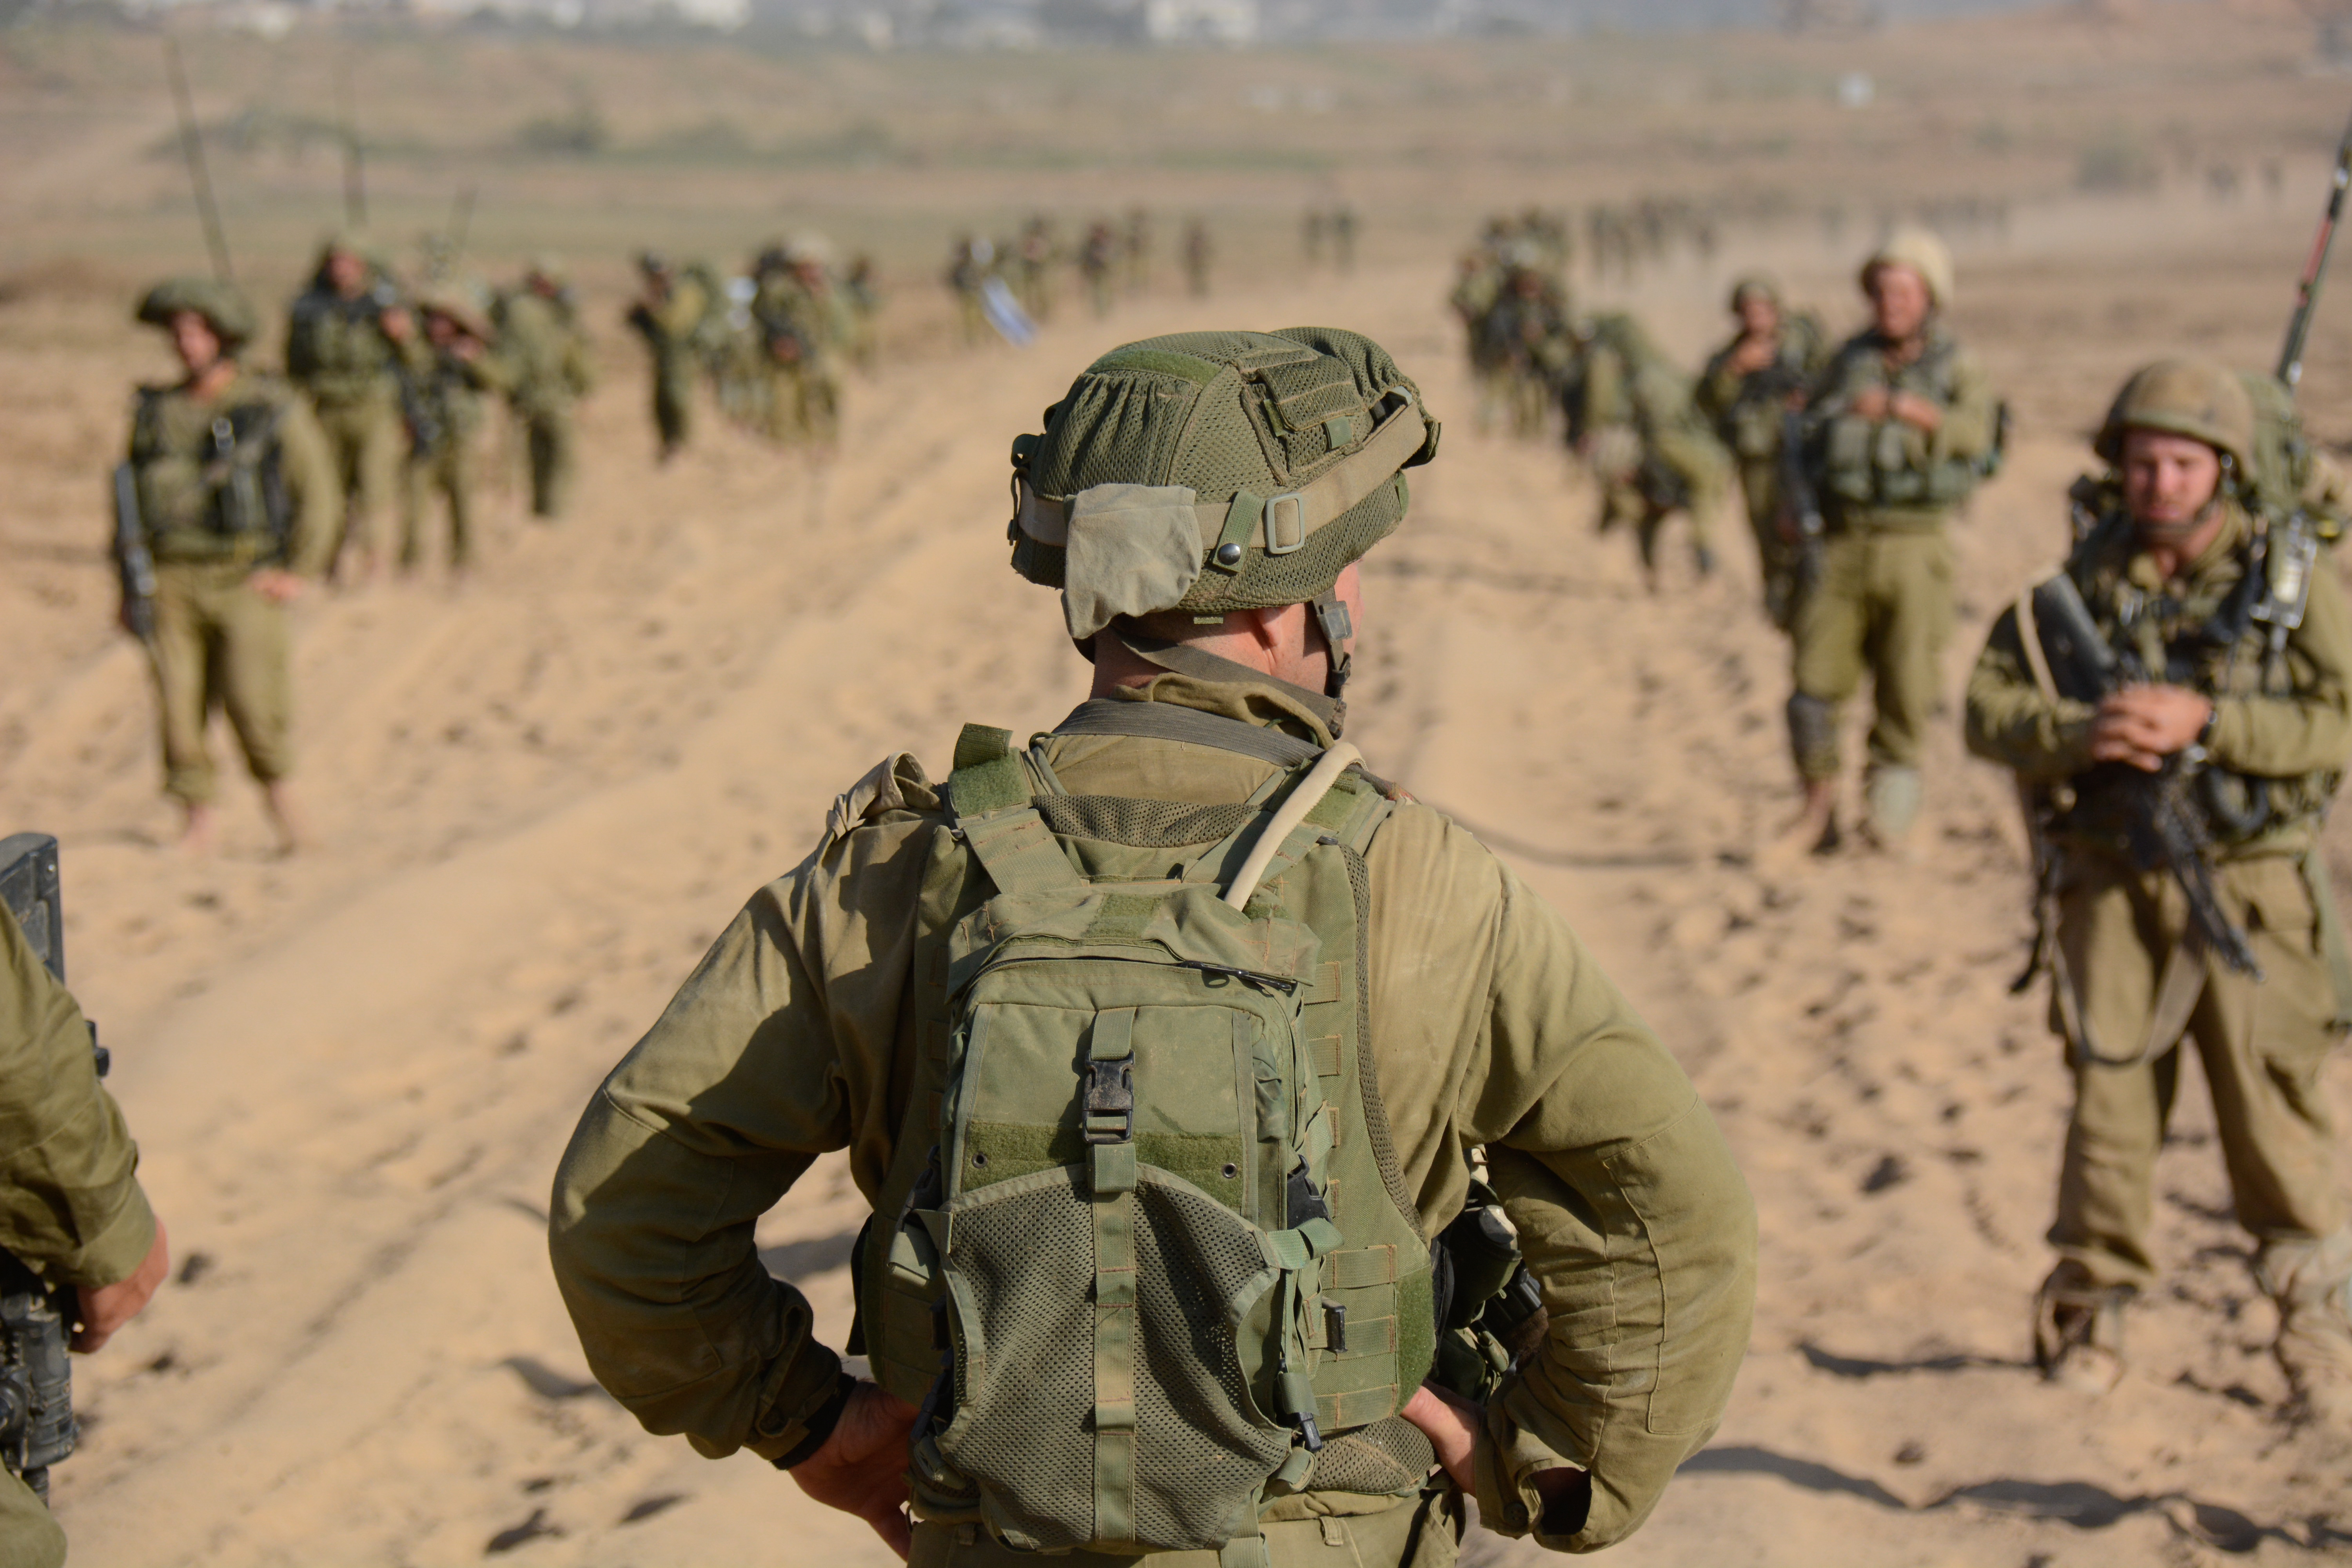 To avoid another attack, Israel tries hard not to 